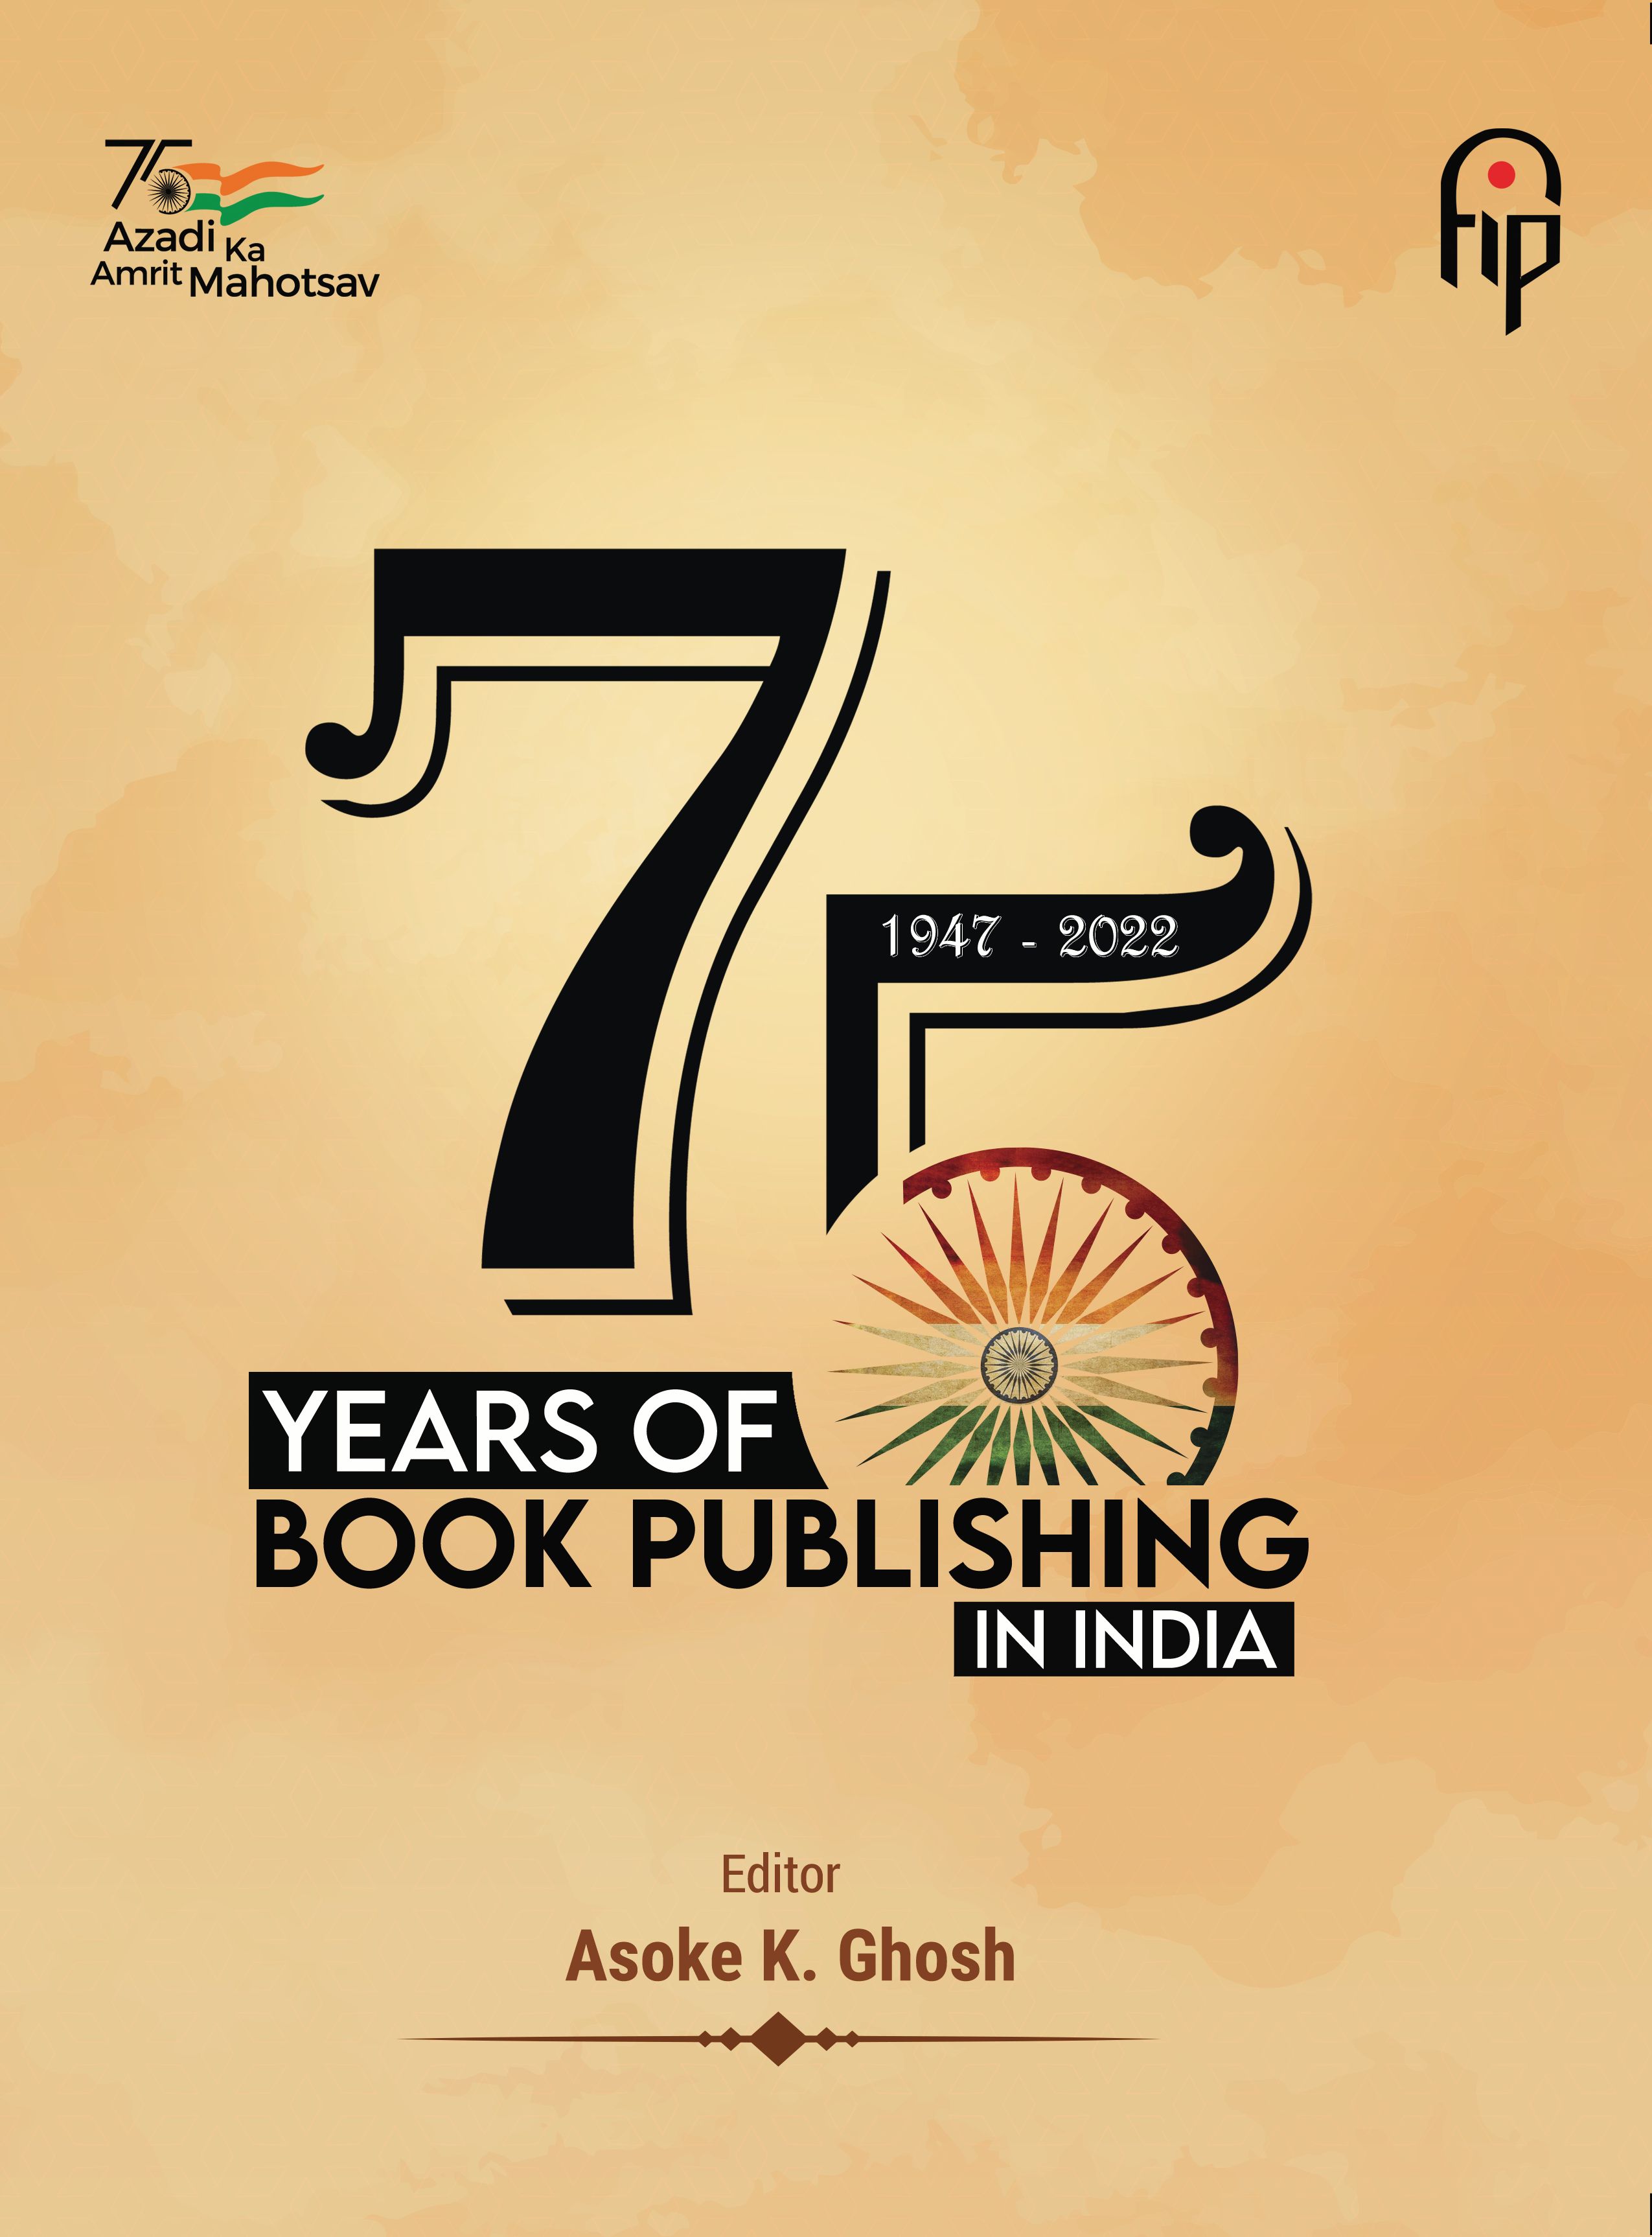 75 YEARS OF BOOK PUBLISHING IN INDIA